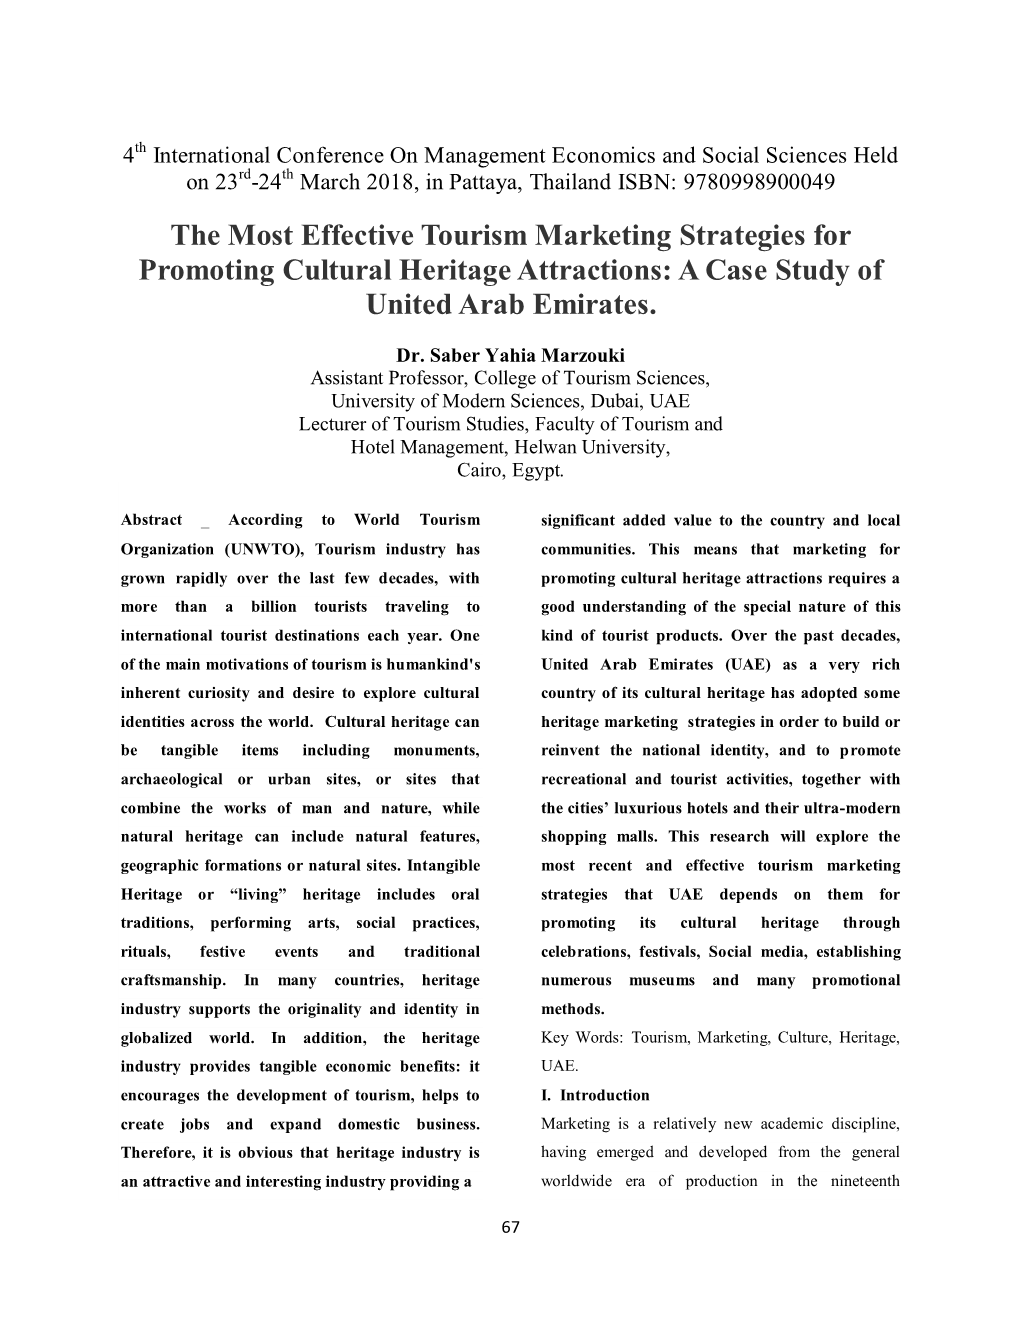 The Most Effective Tourism Marketing Strategies for Promoting Cultural Heritage Attractions: a Case Study of United Arab Emirates